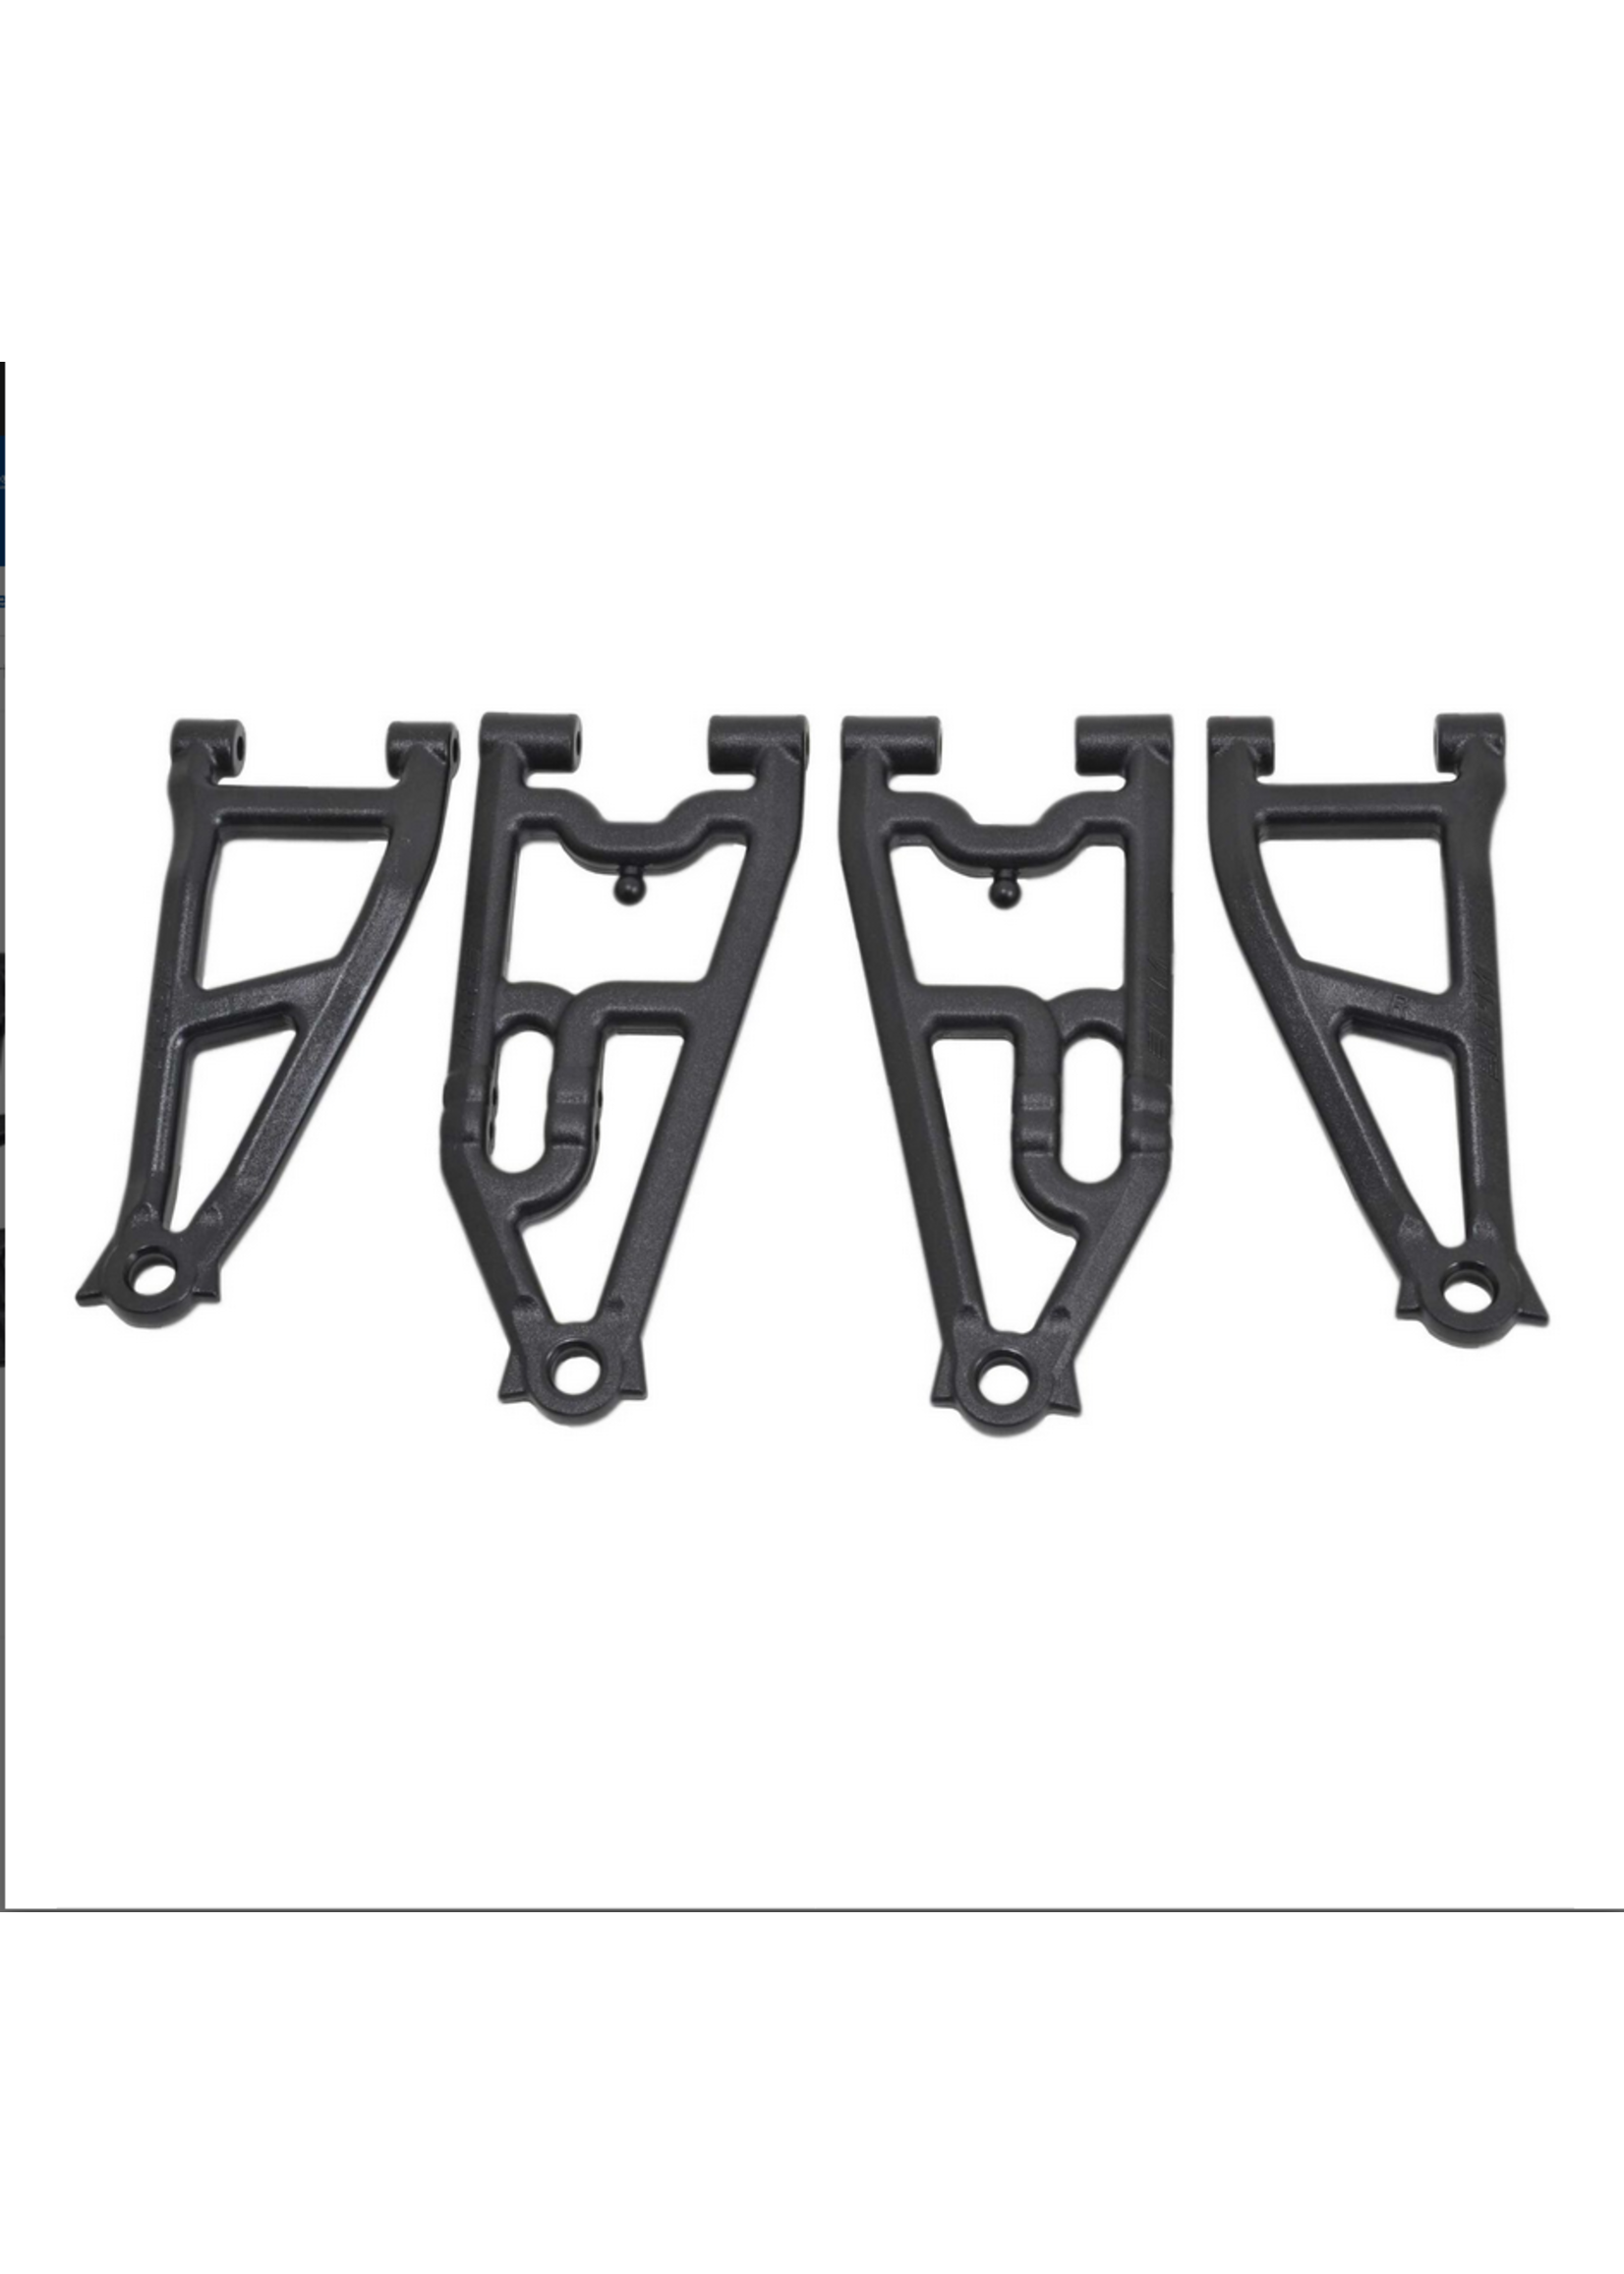 RPM RPM73882 RPM Upper and Lower A-arms, for Losi Baja Rey, Front